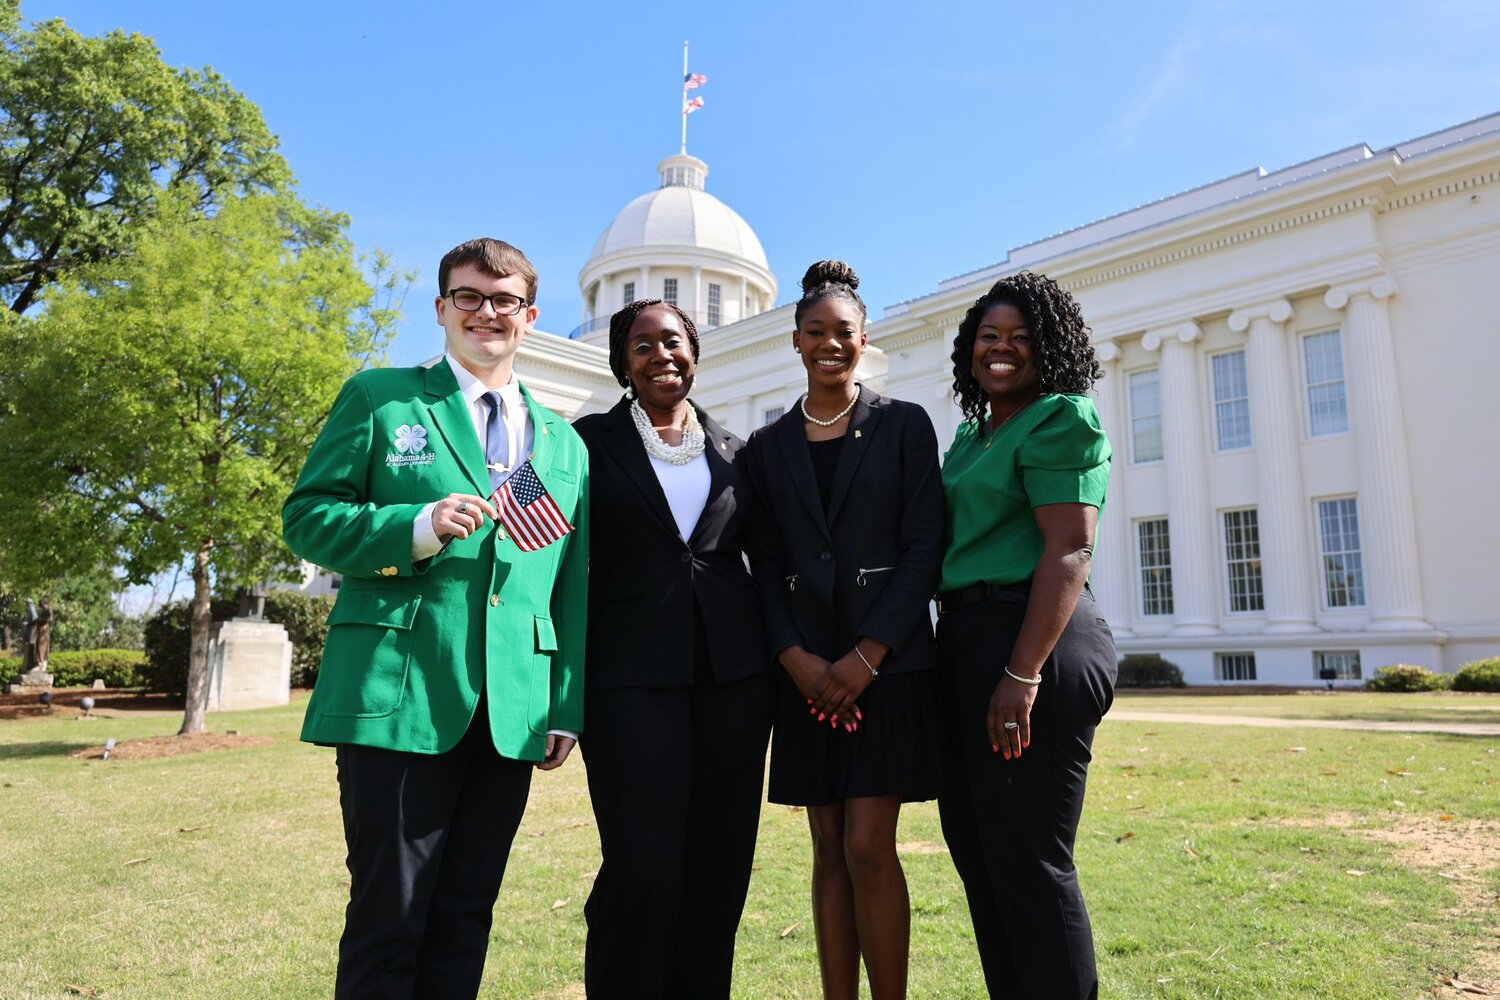 Alabama 4-H is growing the next generation of leaders and Luke Stephens, Izette McNealy and Carrington Robertson are examples of that. They are pictured with 4-H Coordinator Joy Scott from the Alabama A&M and Auburn Universities Extension Office.